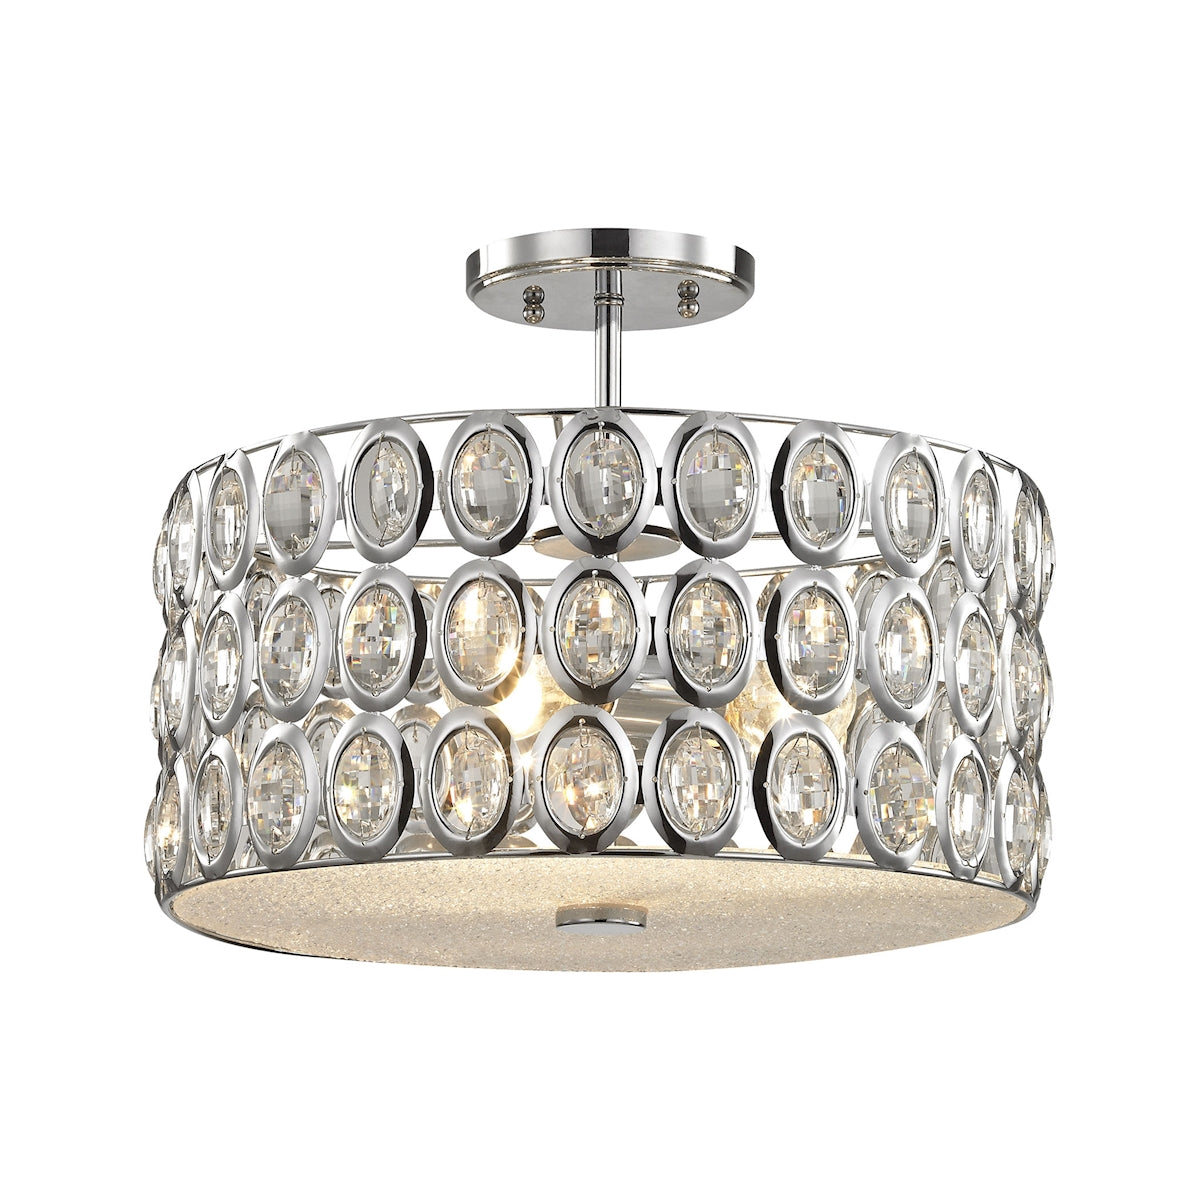 ELK Lighting 81154/3 Tessa 3-Light Semi Flush in Polished Chrome with Clear Crystal